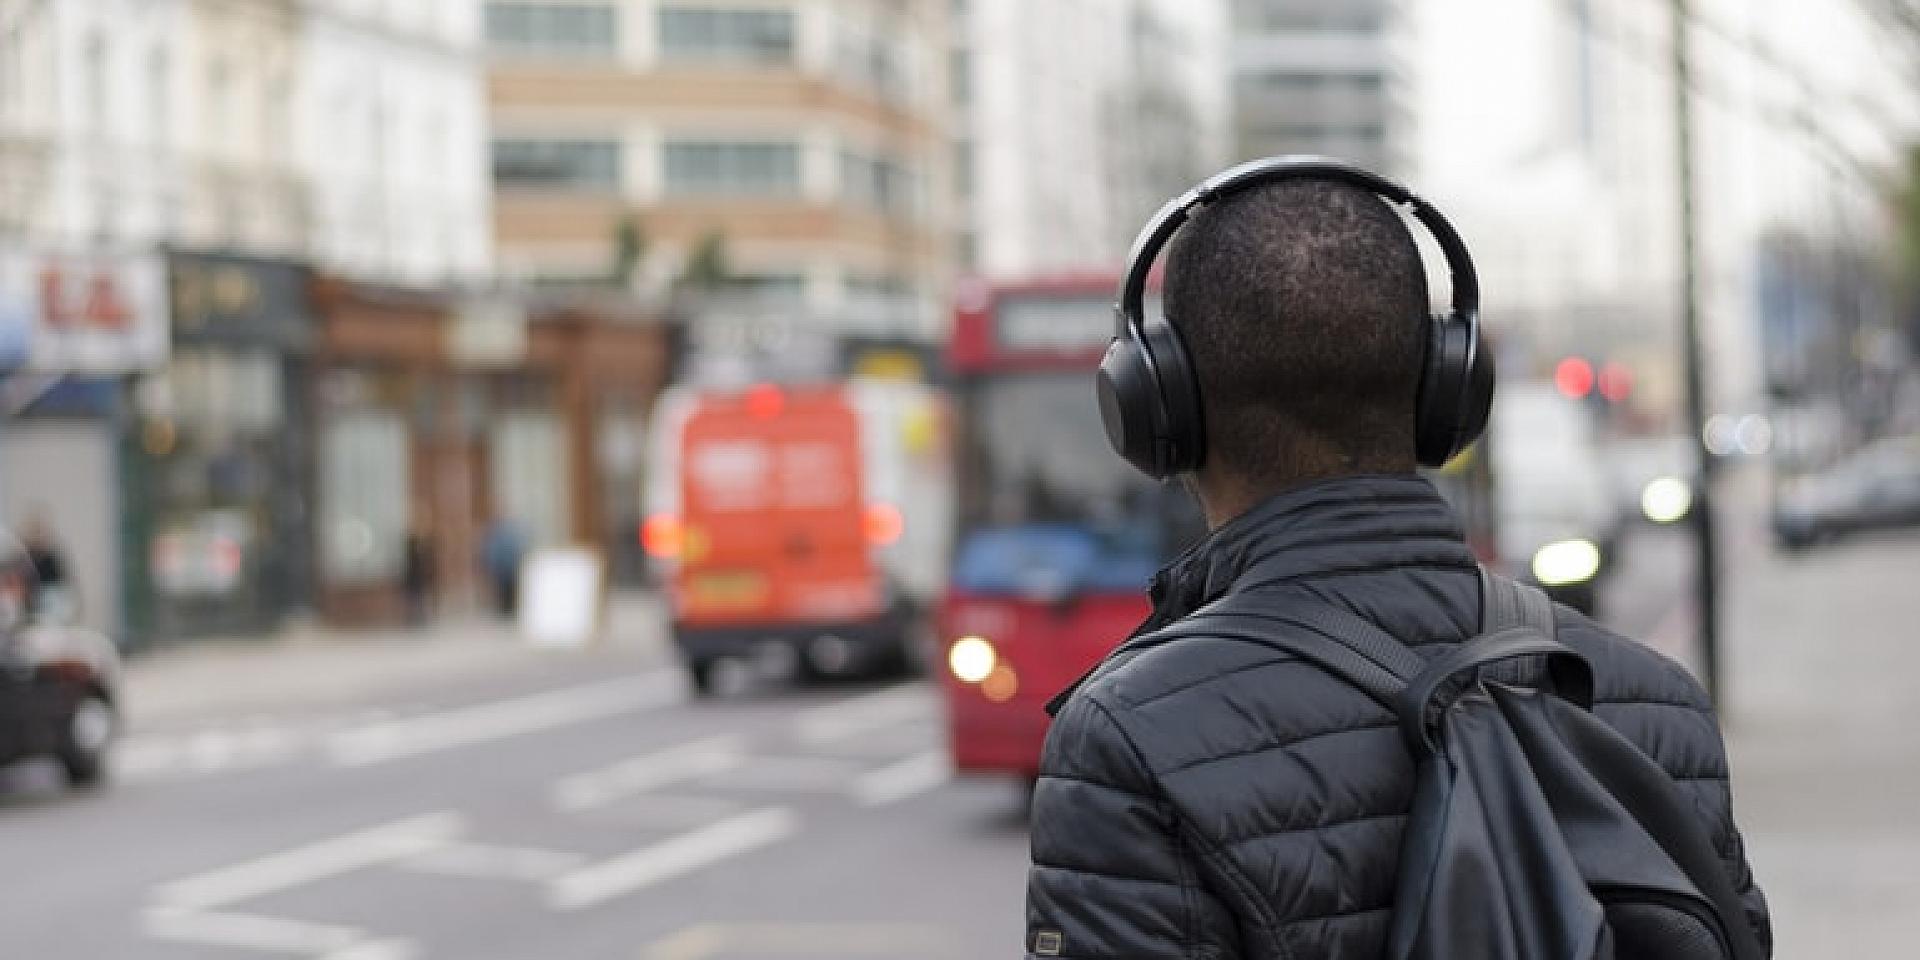 Back of man's head with headphones on, outside on the street